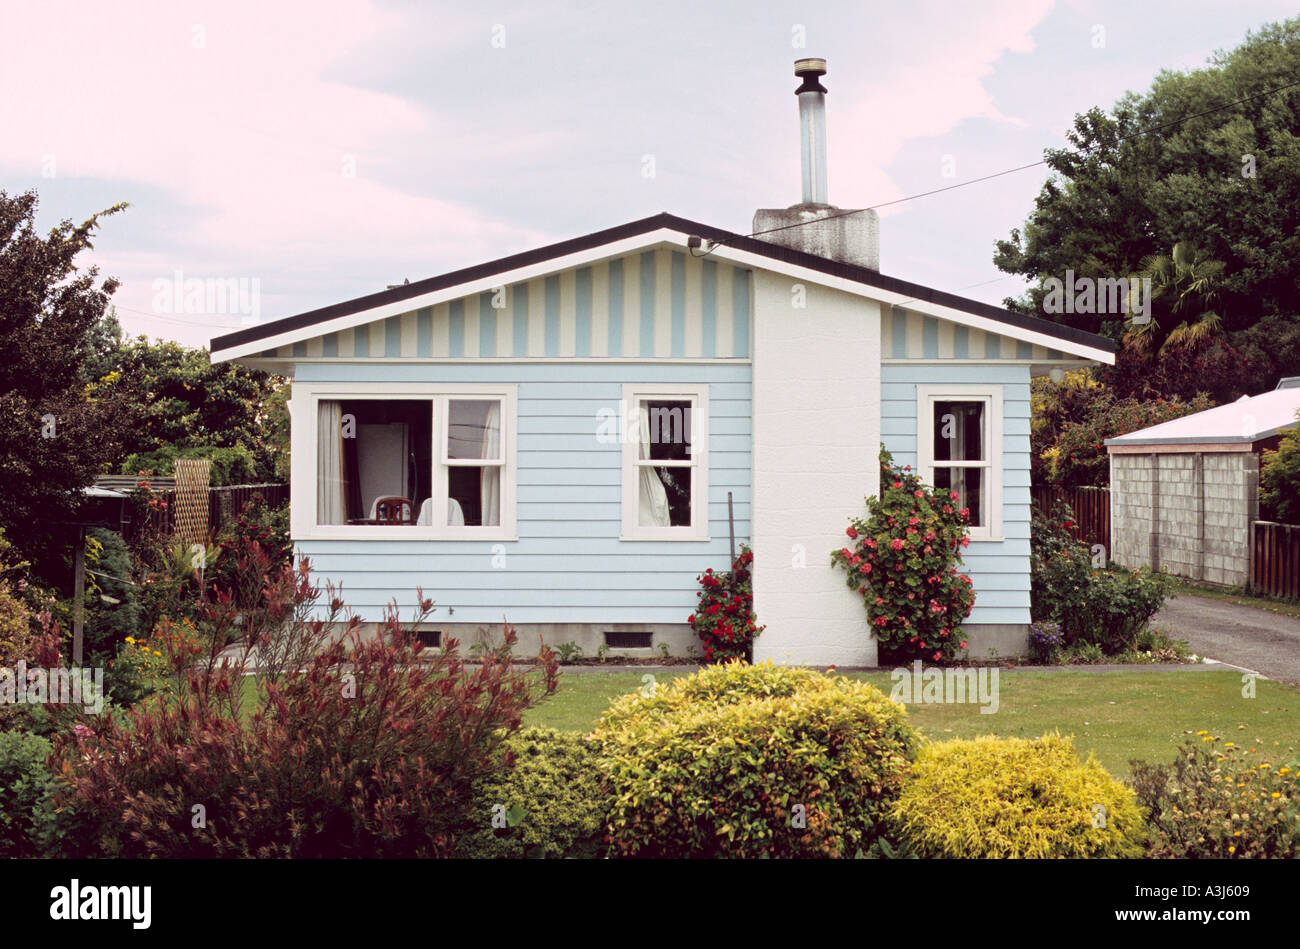 Typical one family dwelling in New Zealand North Island Masterton Stock Photo